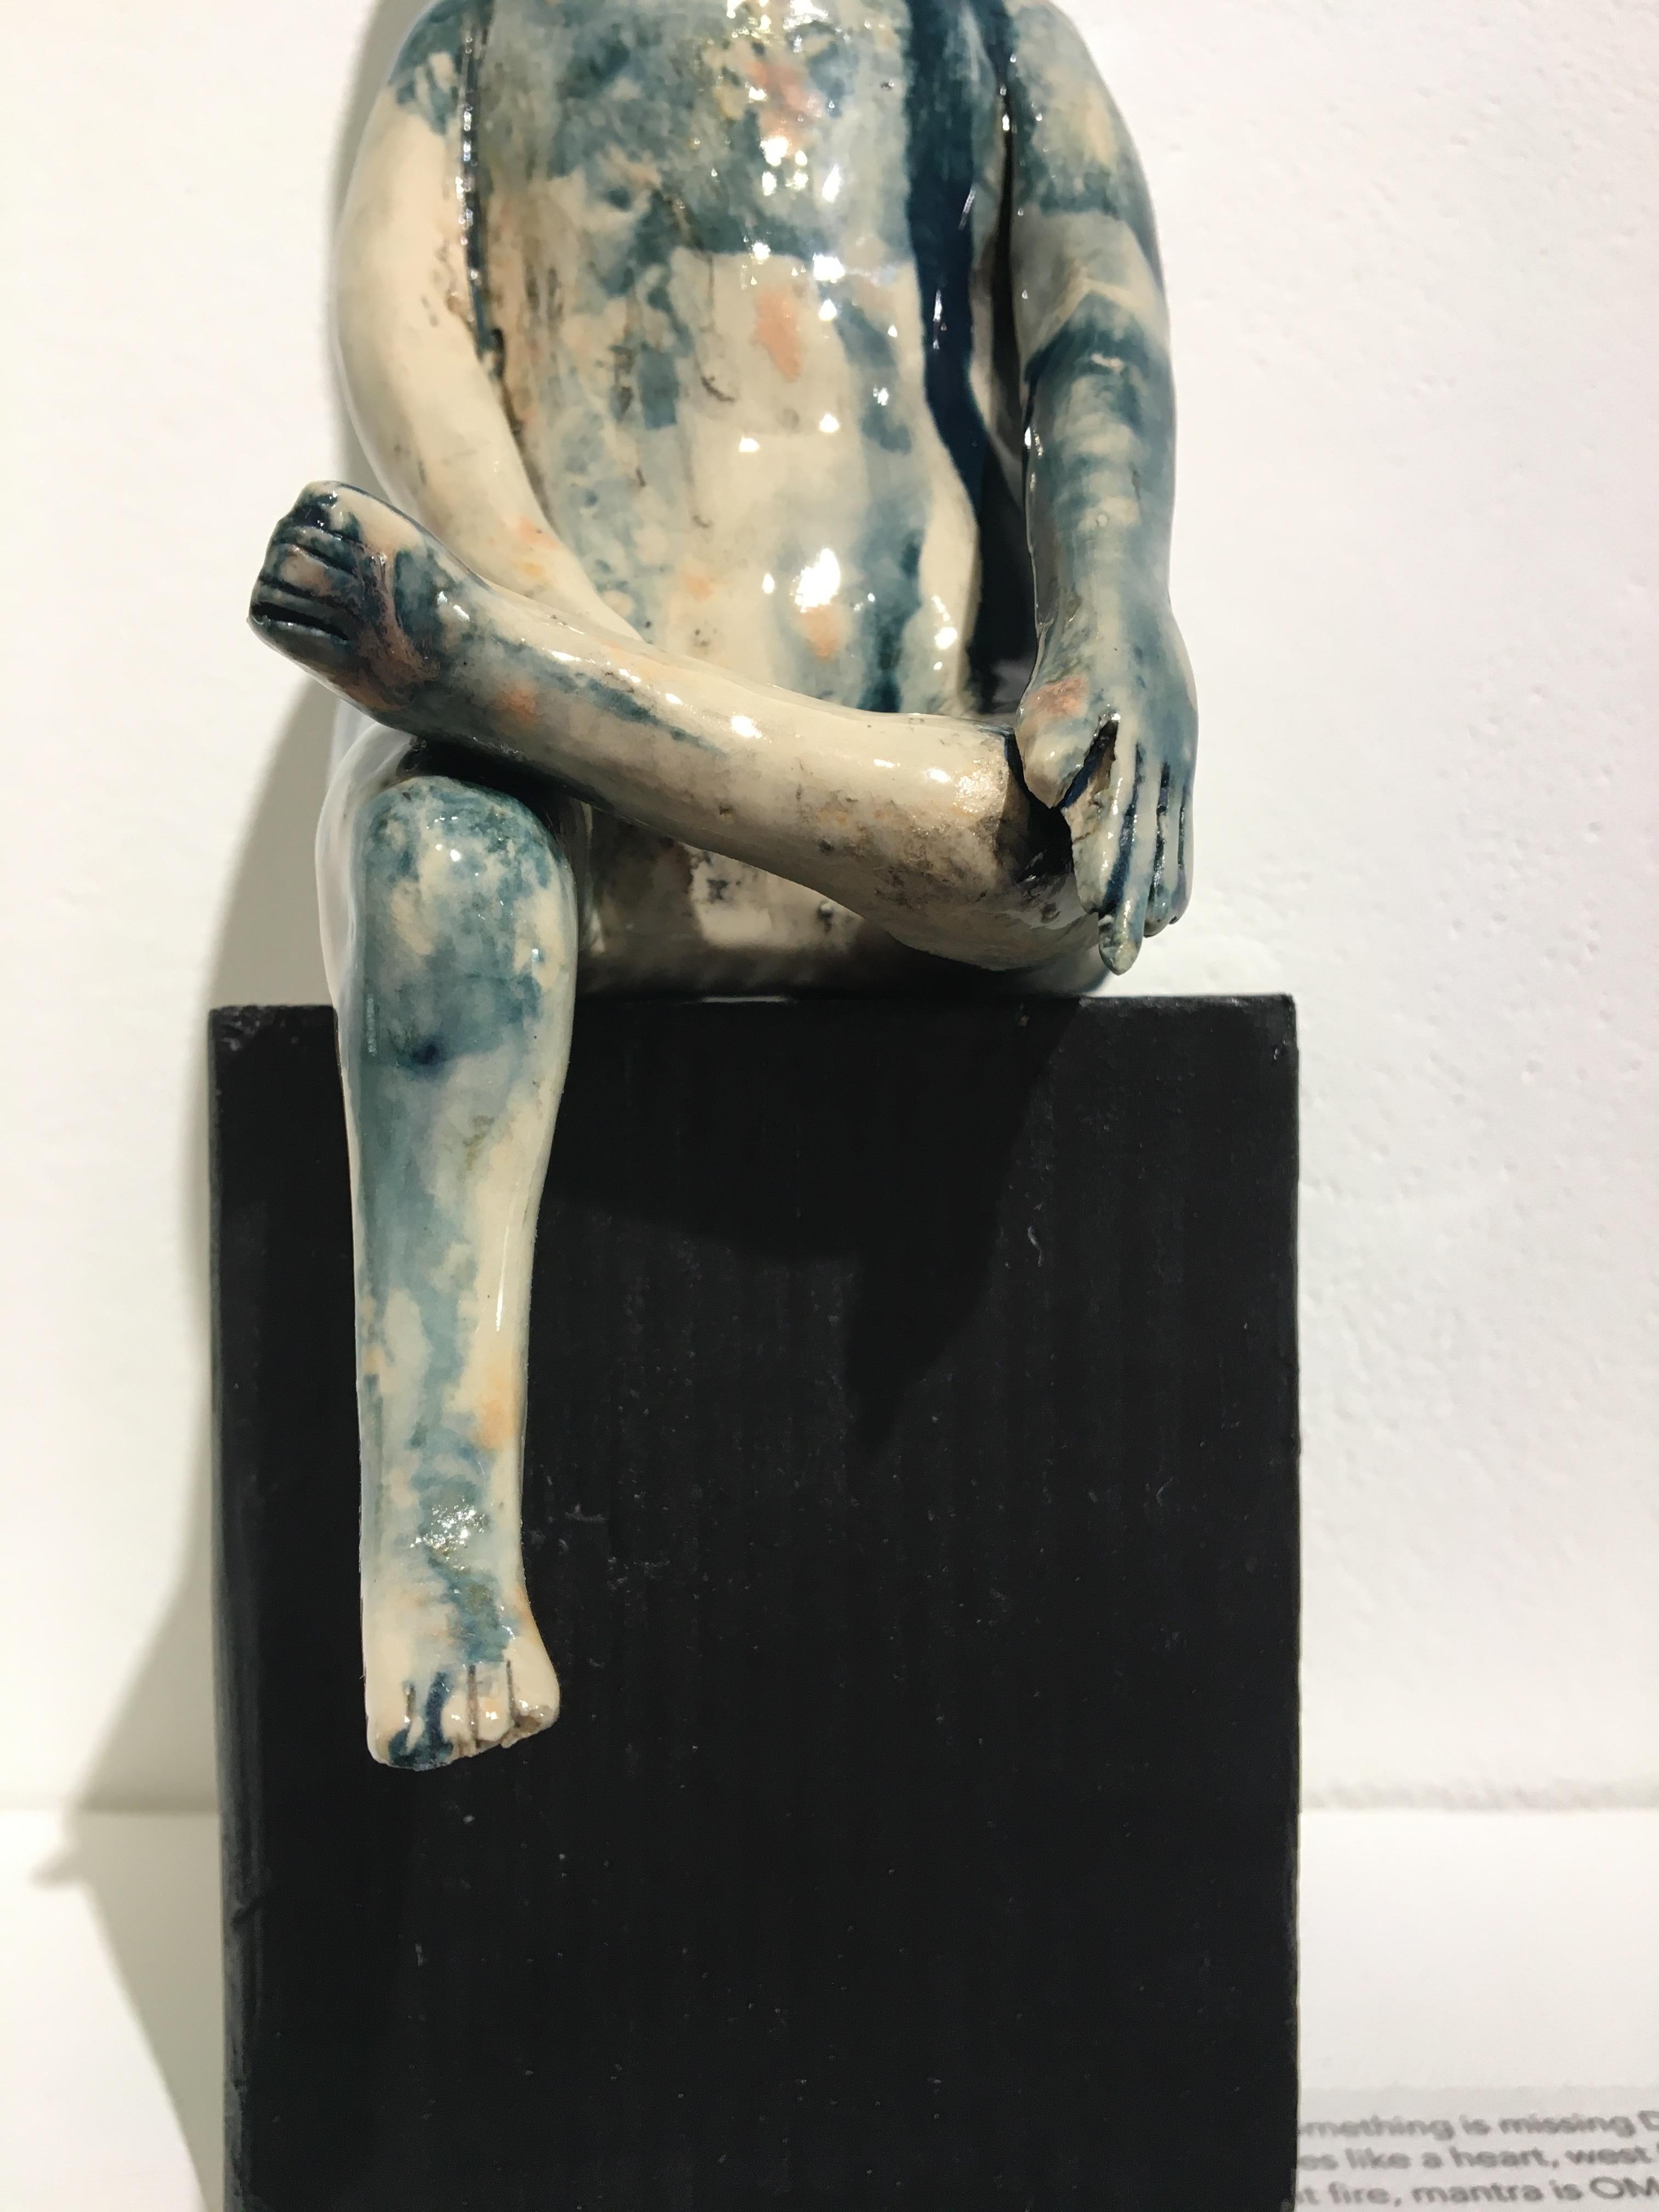 Ceramic: 'Bhumisparsa mudra east, water earth touching, humility mantra is HUM' - Contemporary Sculpture by Ashley Benton